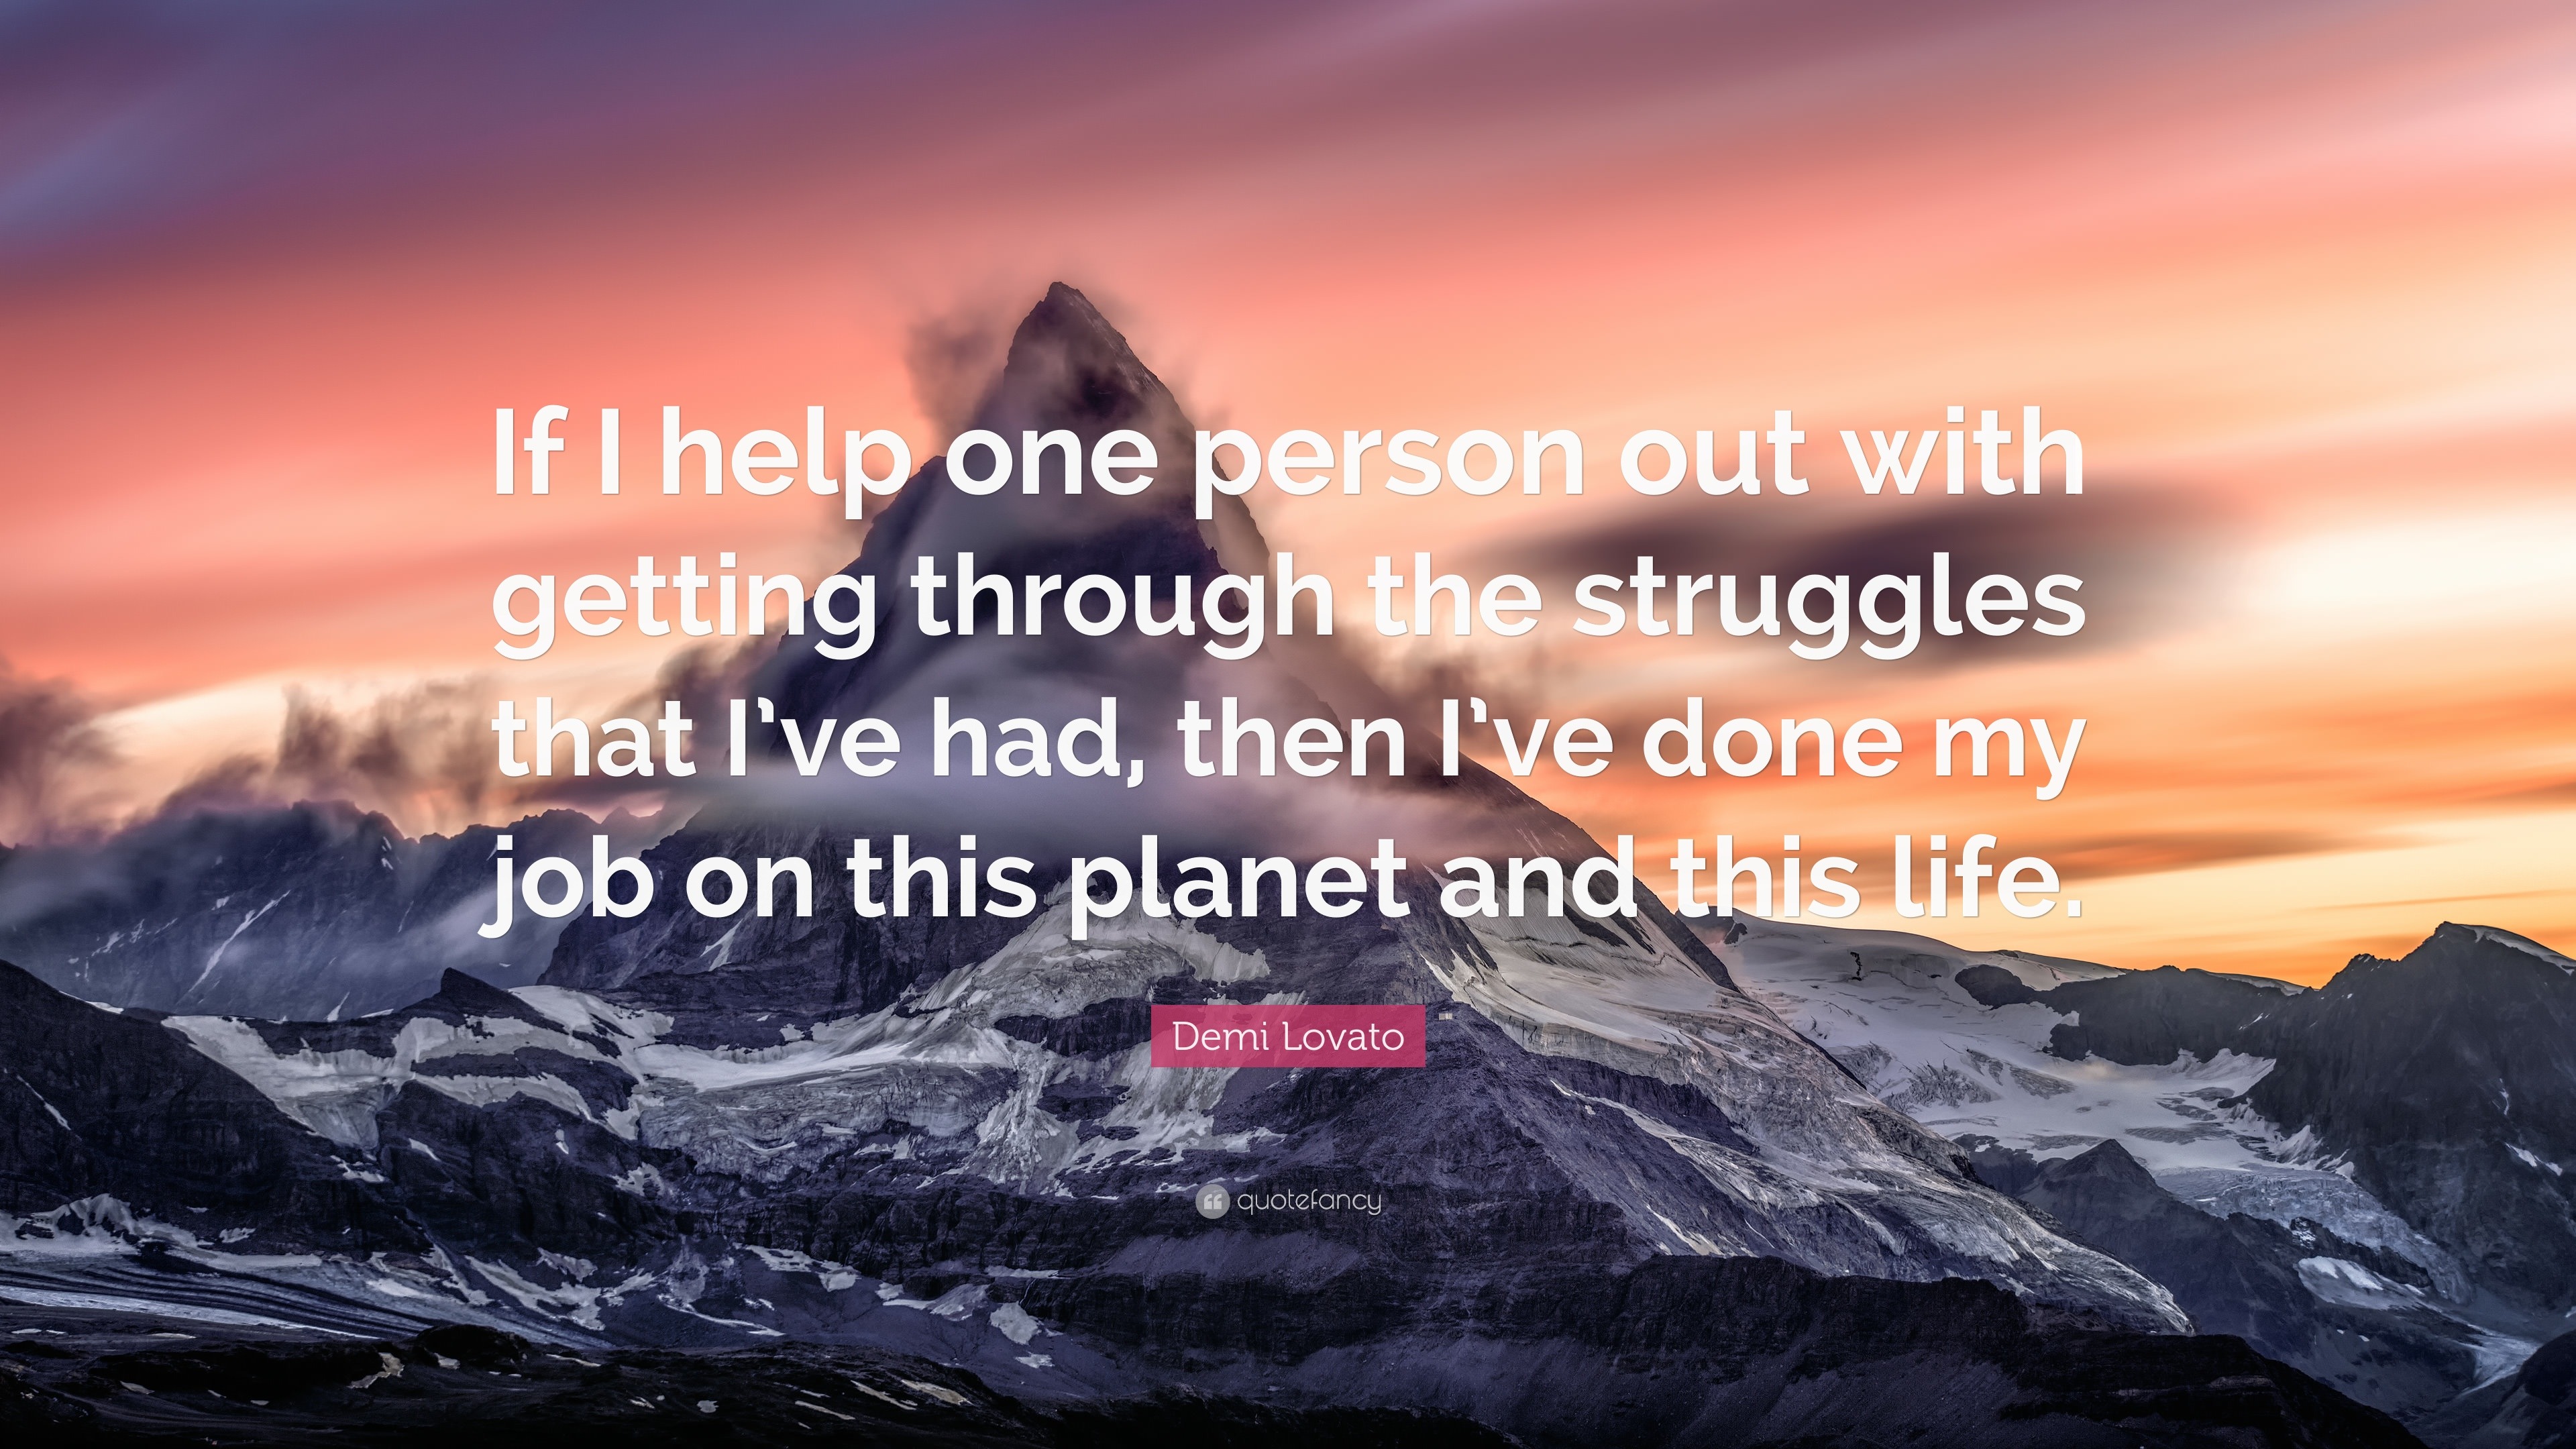 Demi Lovato Quote: “If I help one person out with getting ...